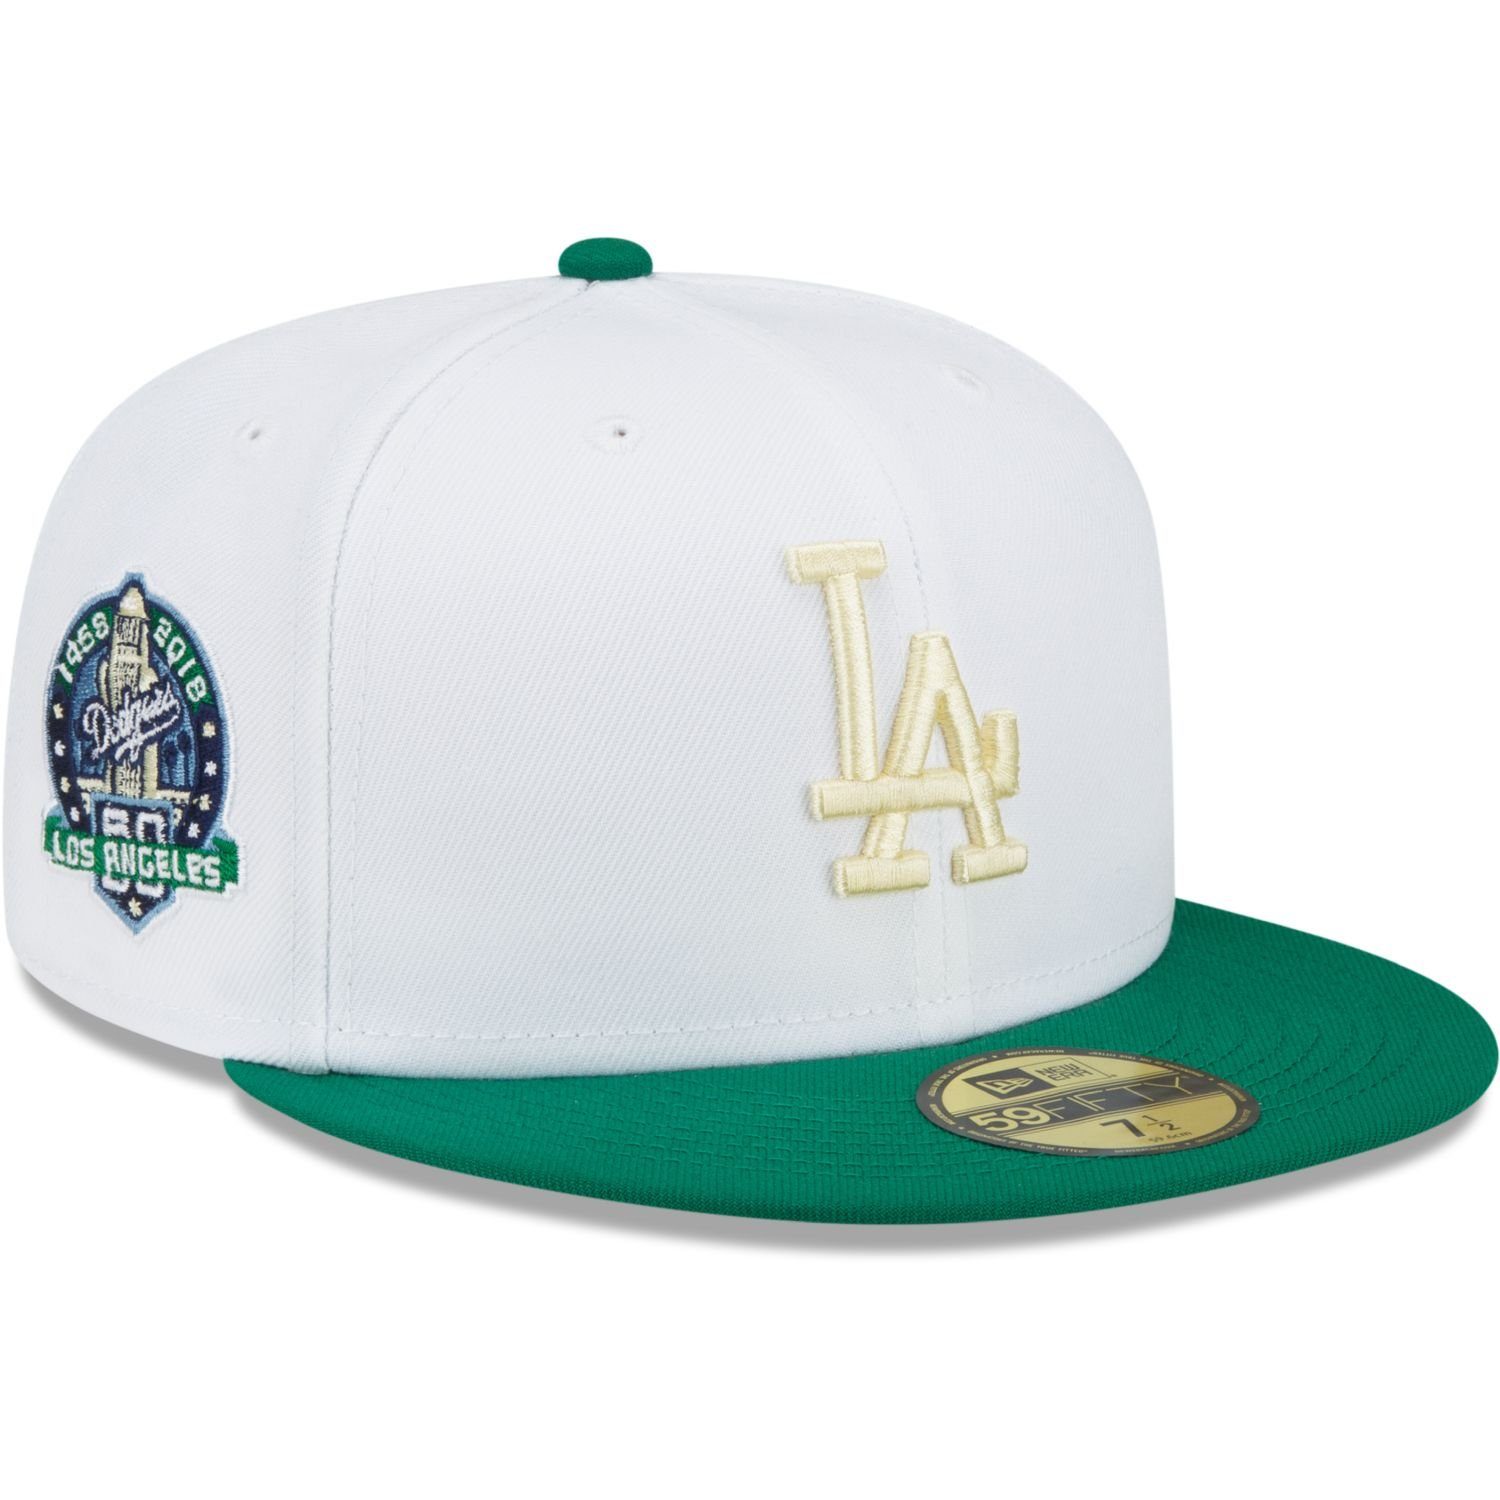 New Era Fitted Cap ANNIVERSARY 59Fifty Dodgers Los Angeles